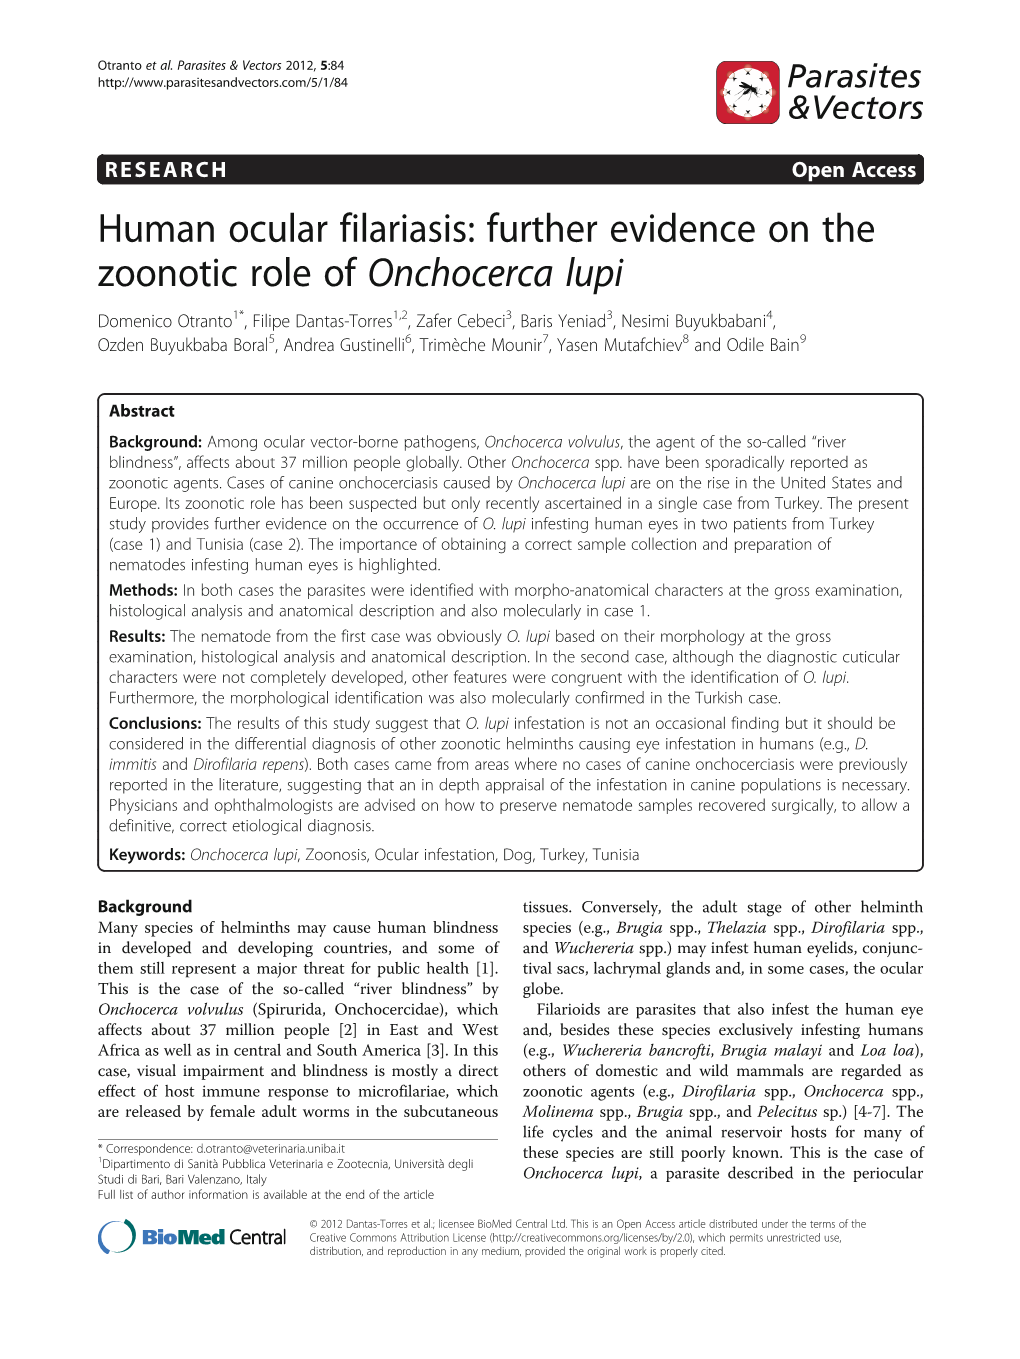 Human Ocular Filariasis: Further Evidence on the Zoonotic Role Of